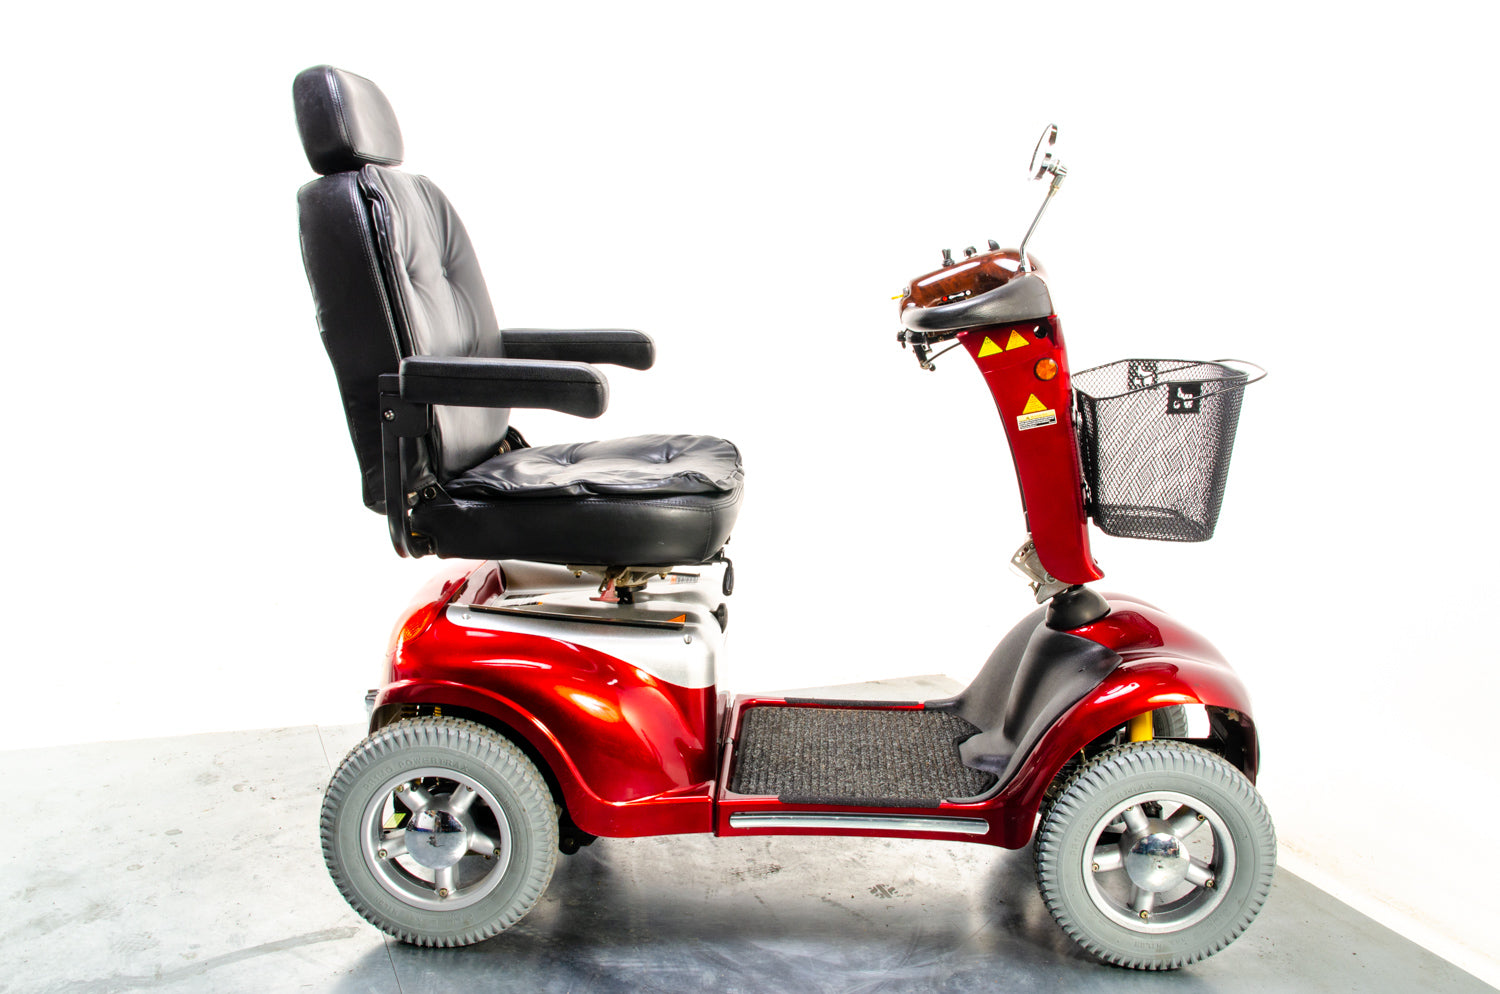 Shoprider Cordoba Off-Road All-Terrain Used Mobility Scooter Large 8mph Roma Red 13416